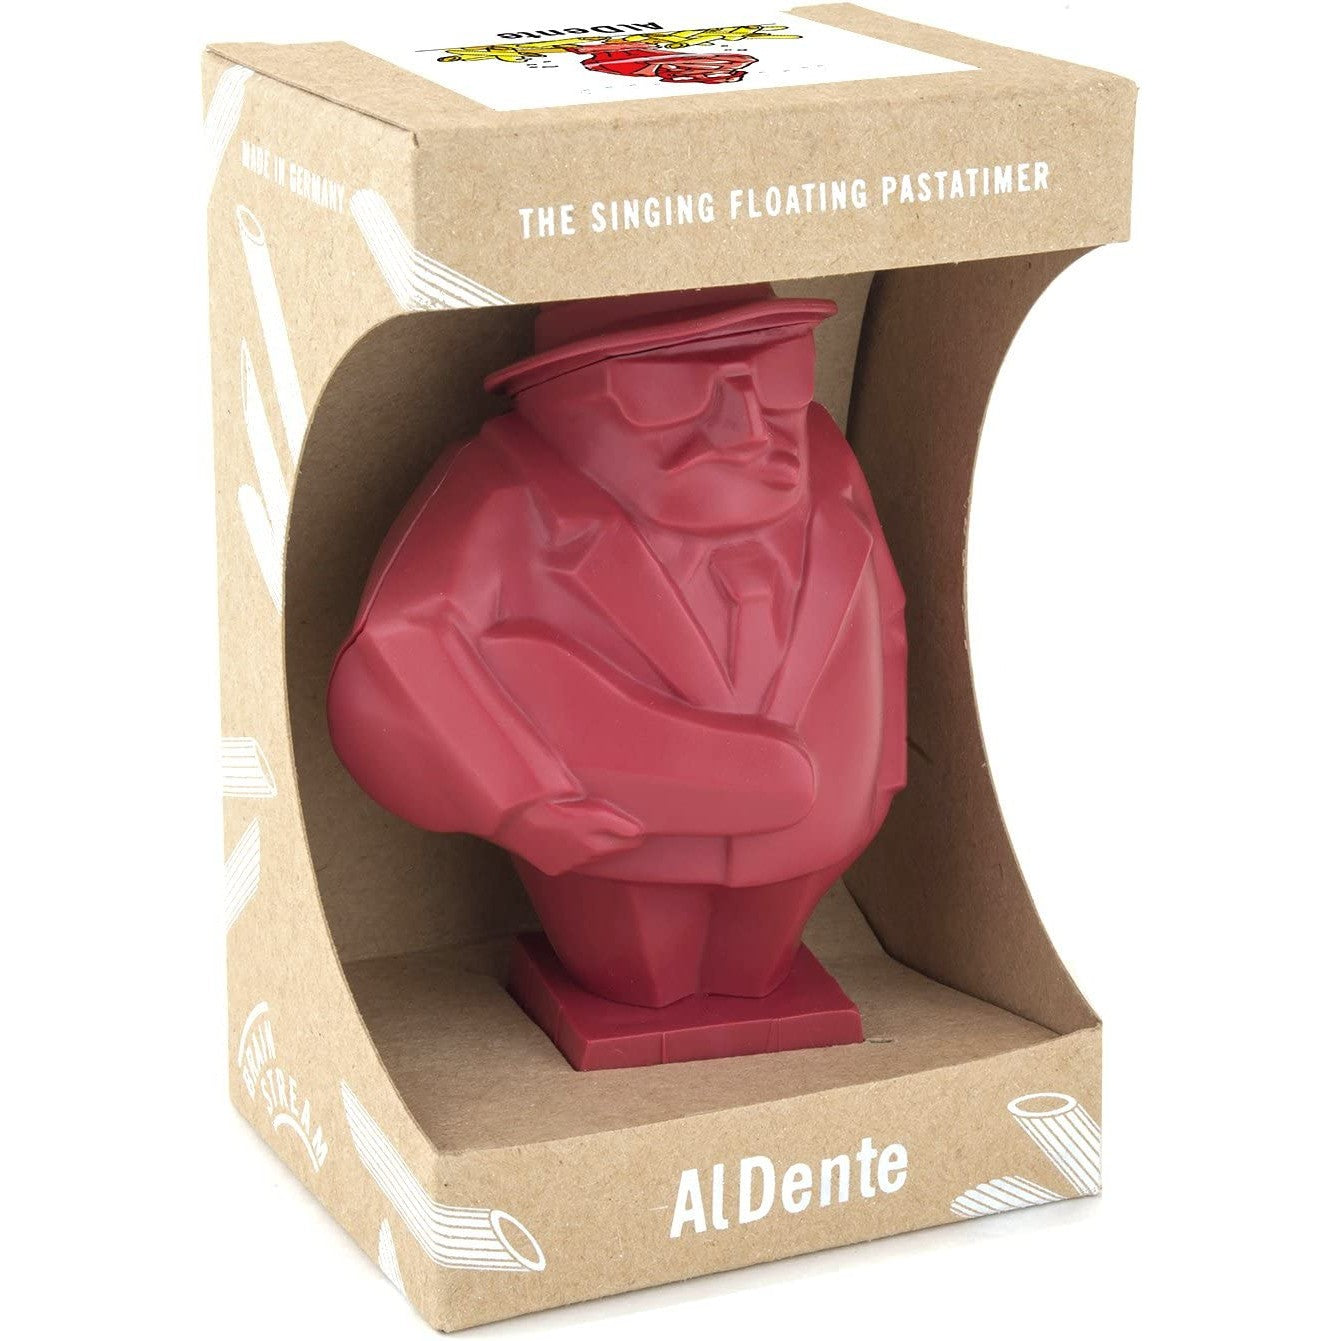 The singing floating pasta timer called Al Dente inside the box.